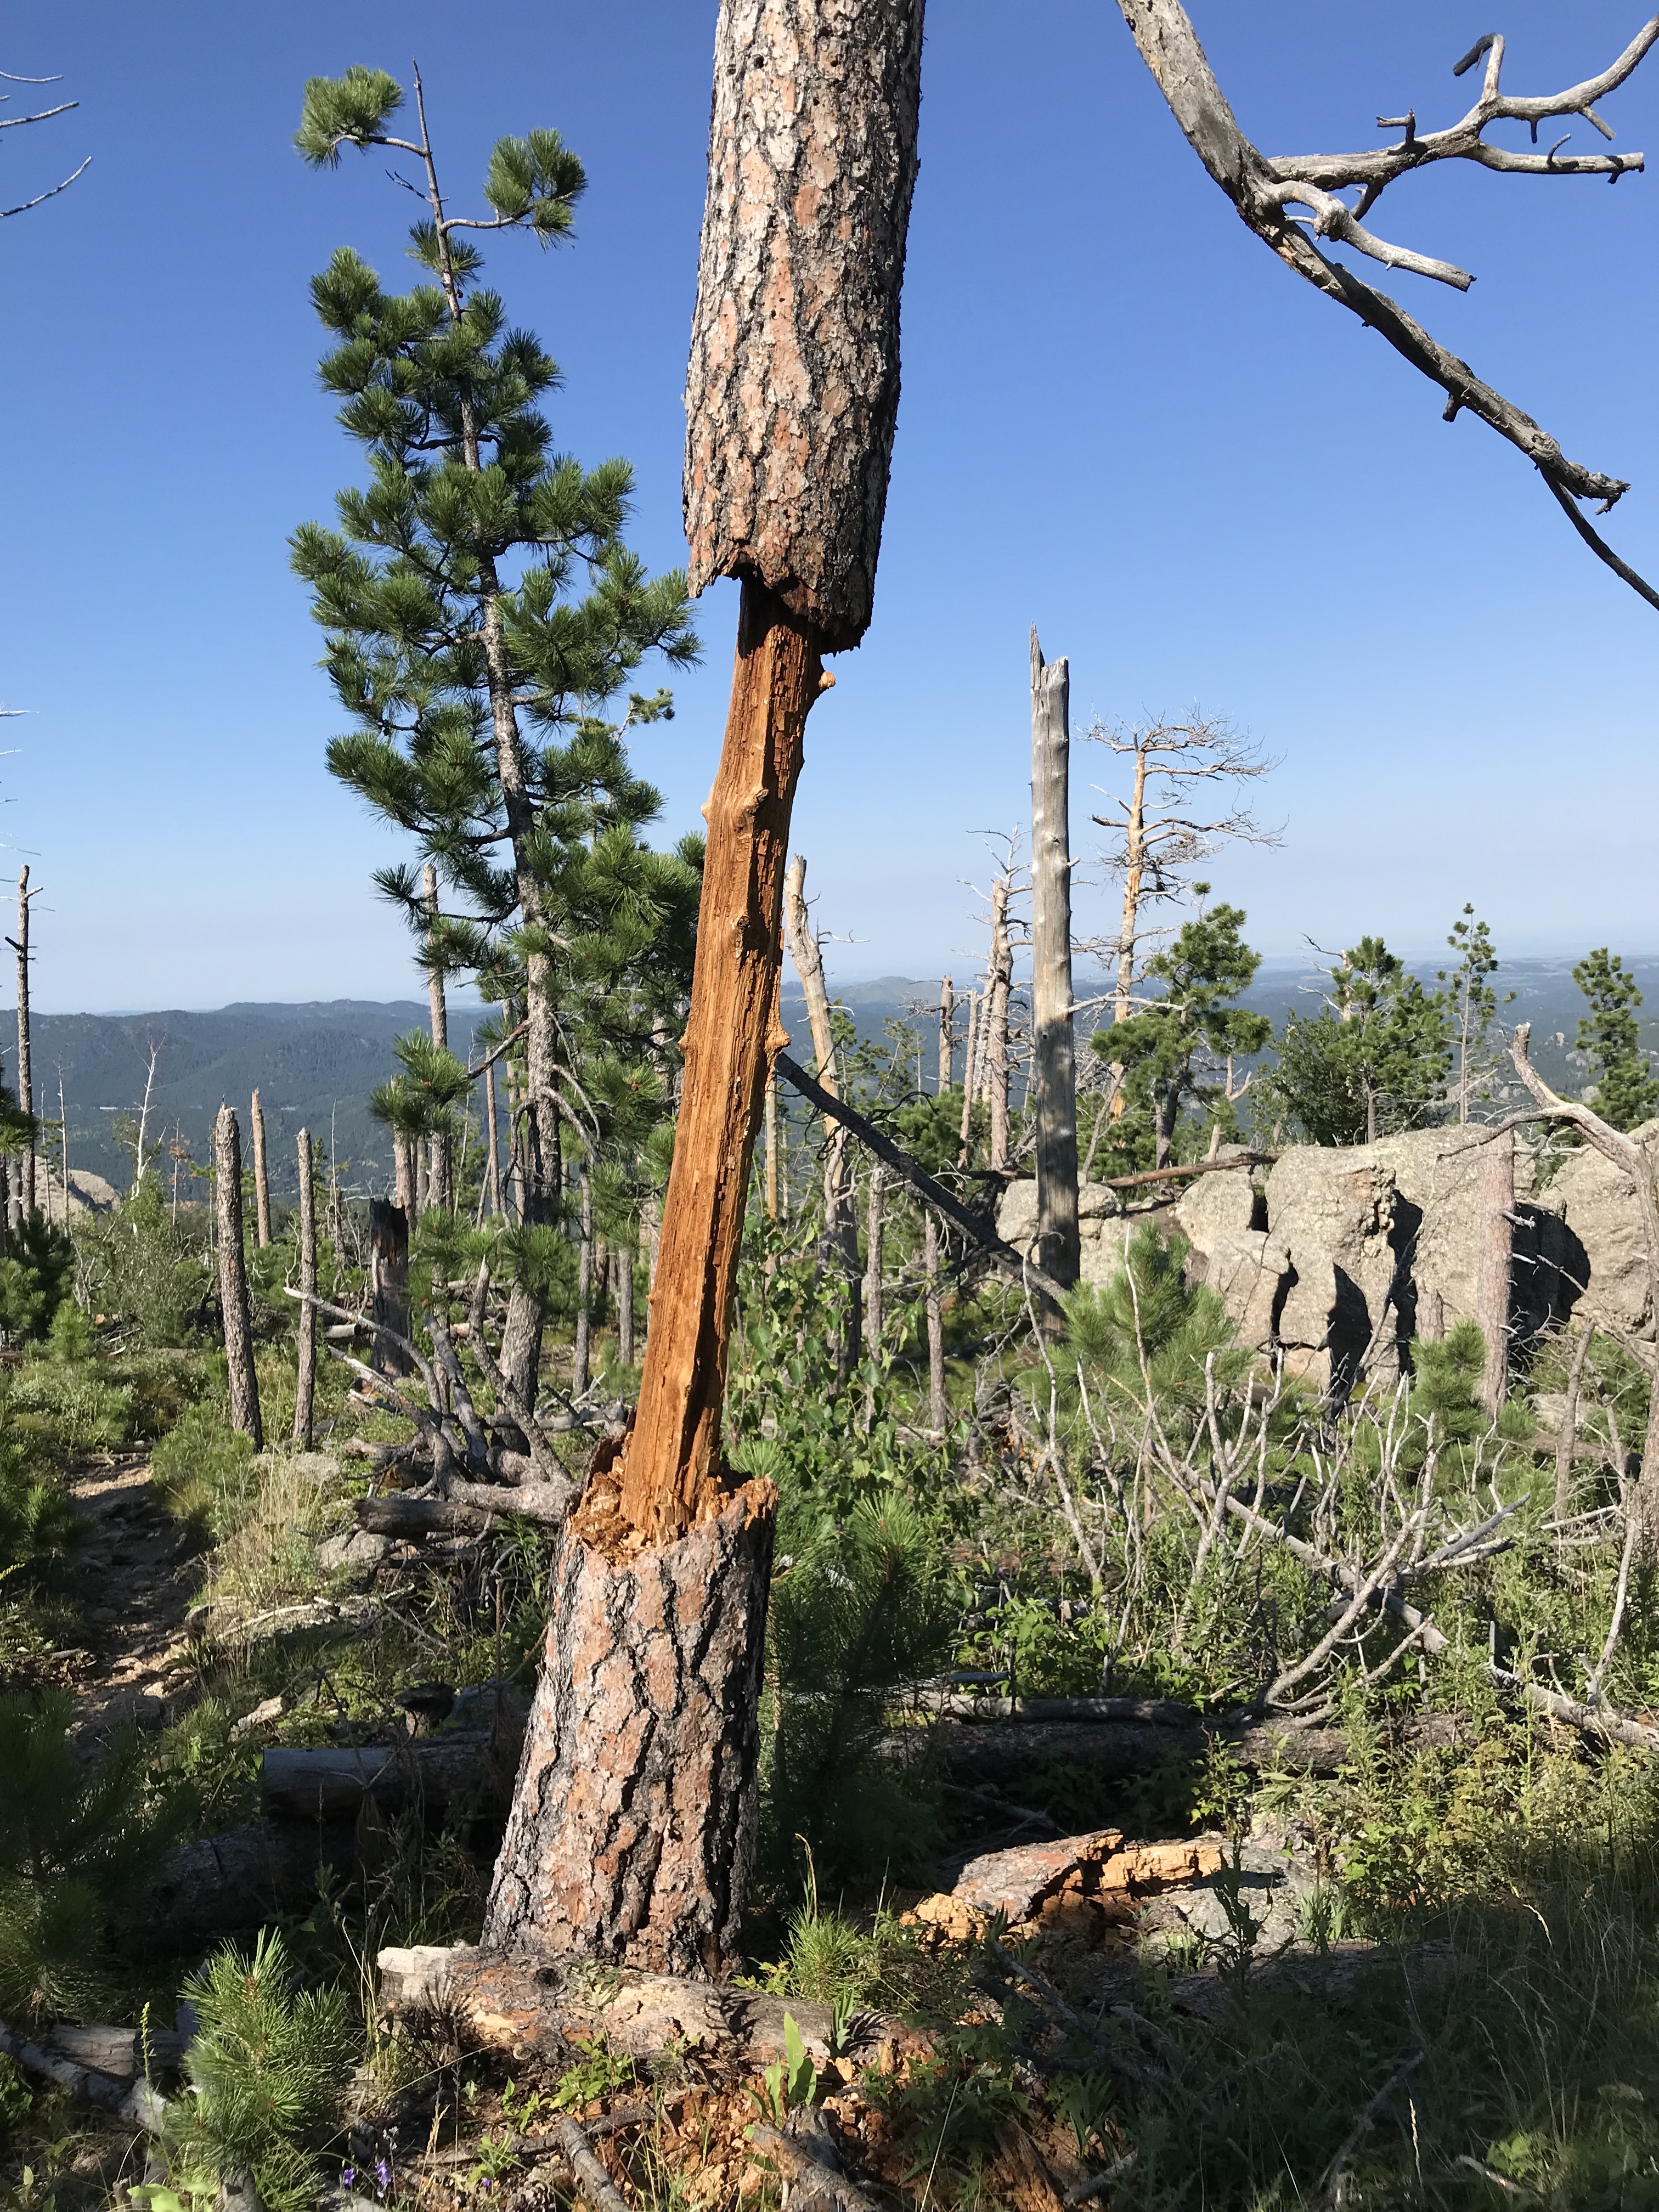 A standing, dead, tree trunk that has had the bark and most of the trunk chewed/whittled away in the middle, stands in the sparse forest, all under a clear, blue sky